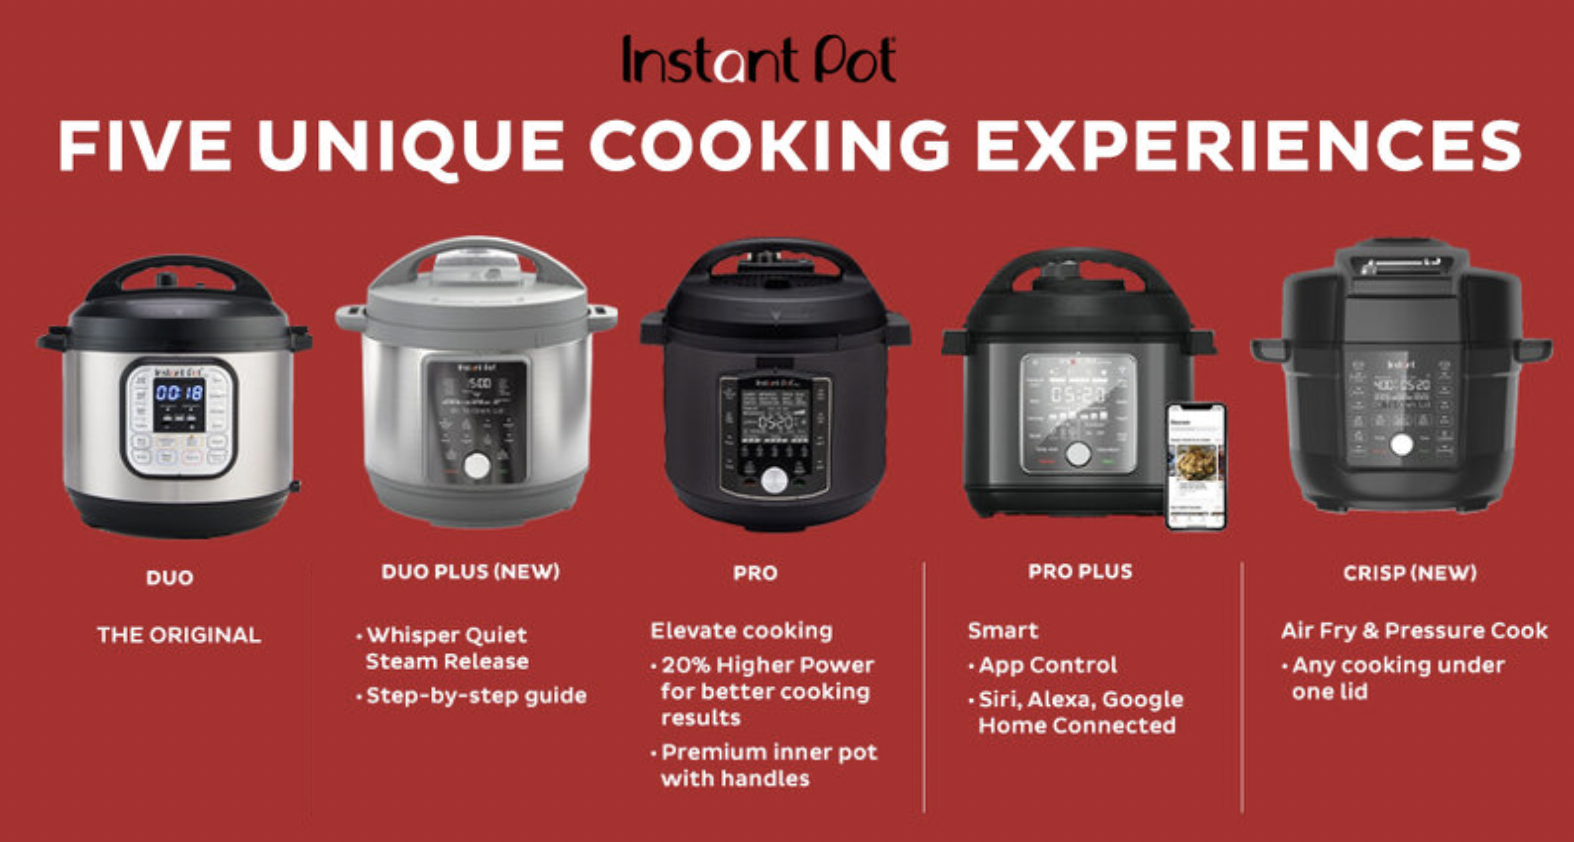 What's the Difference Between a Ninja Foodi and an Instant Pot? - The  Cookful